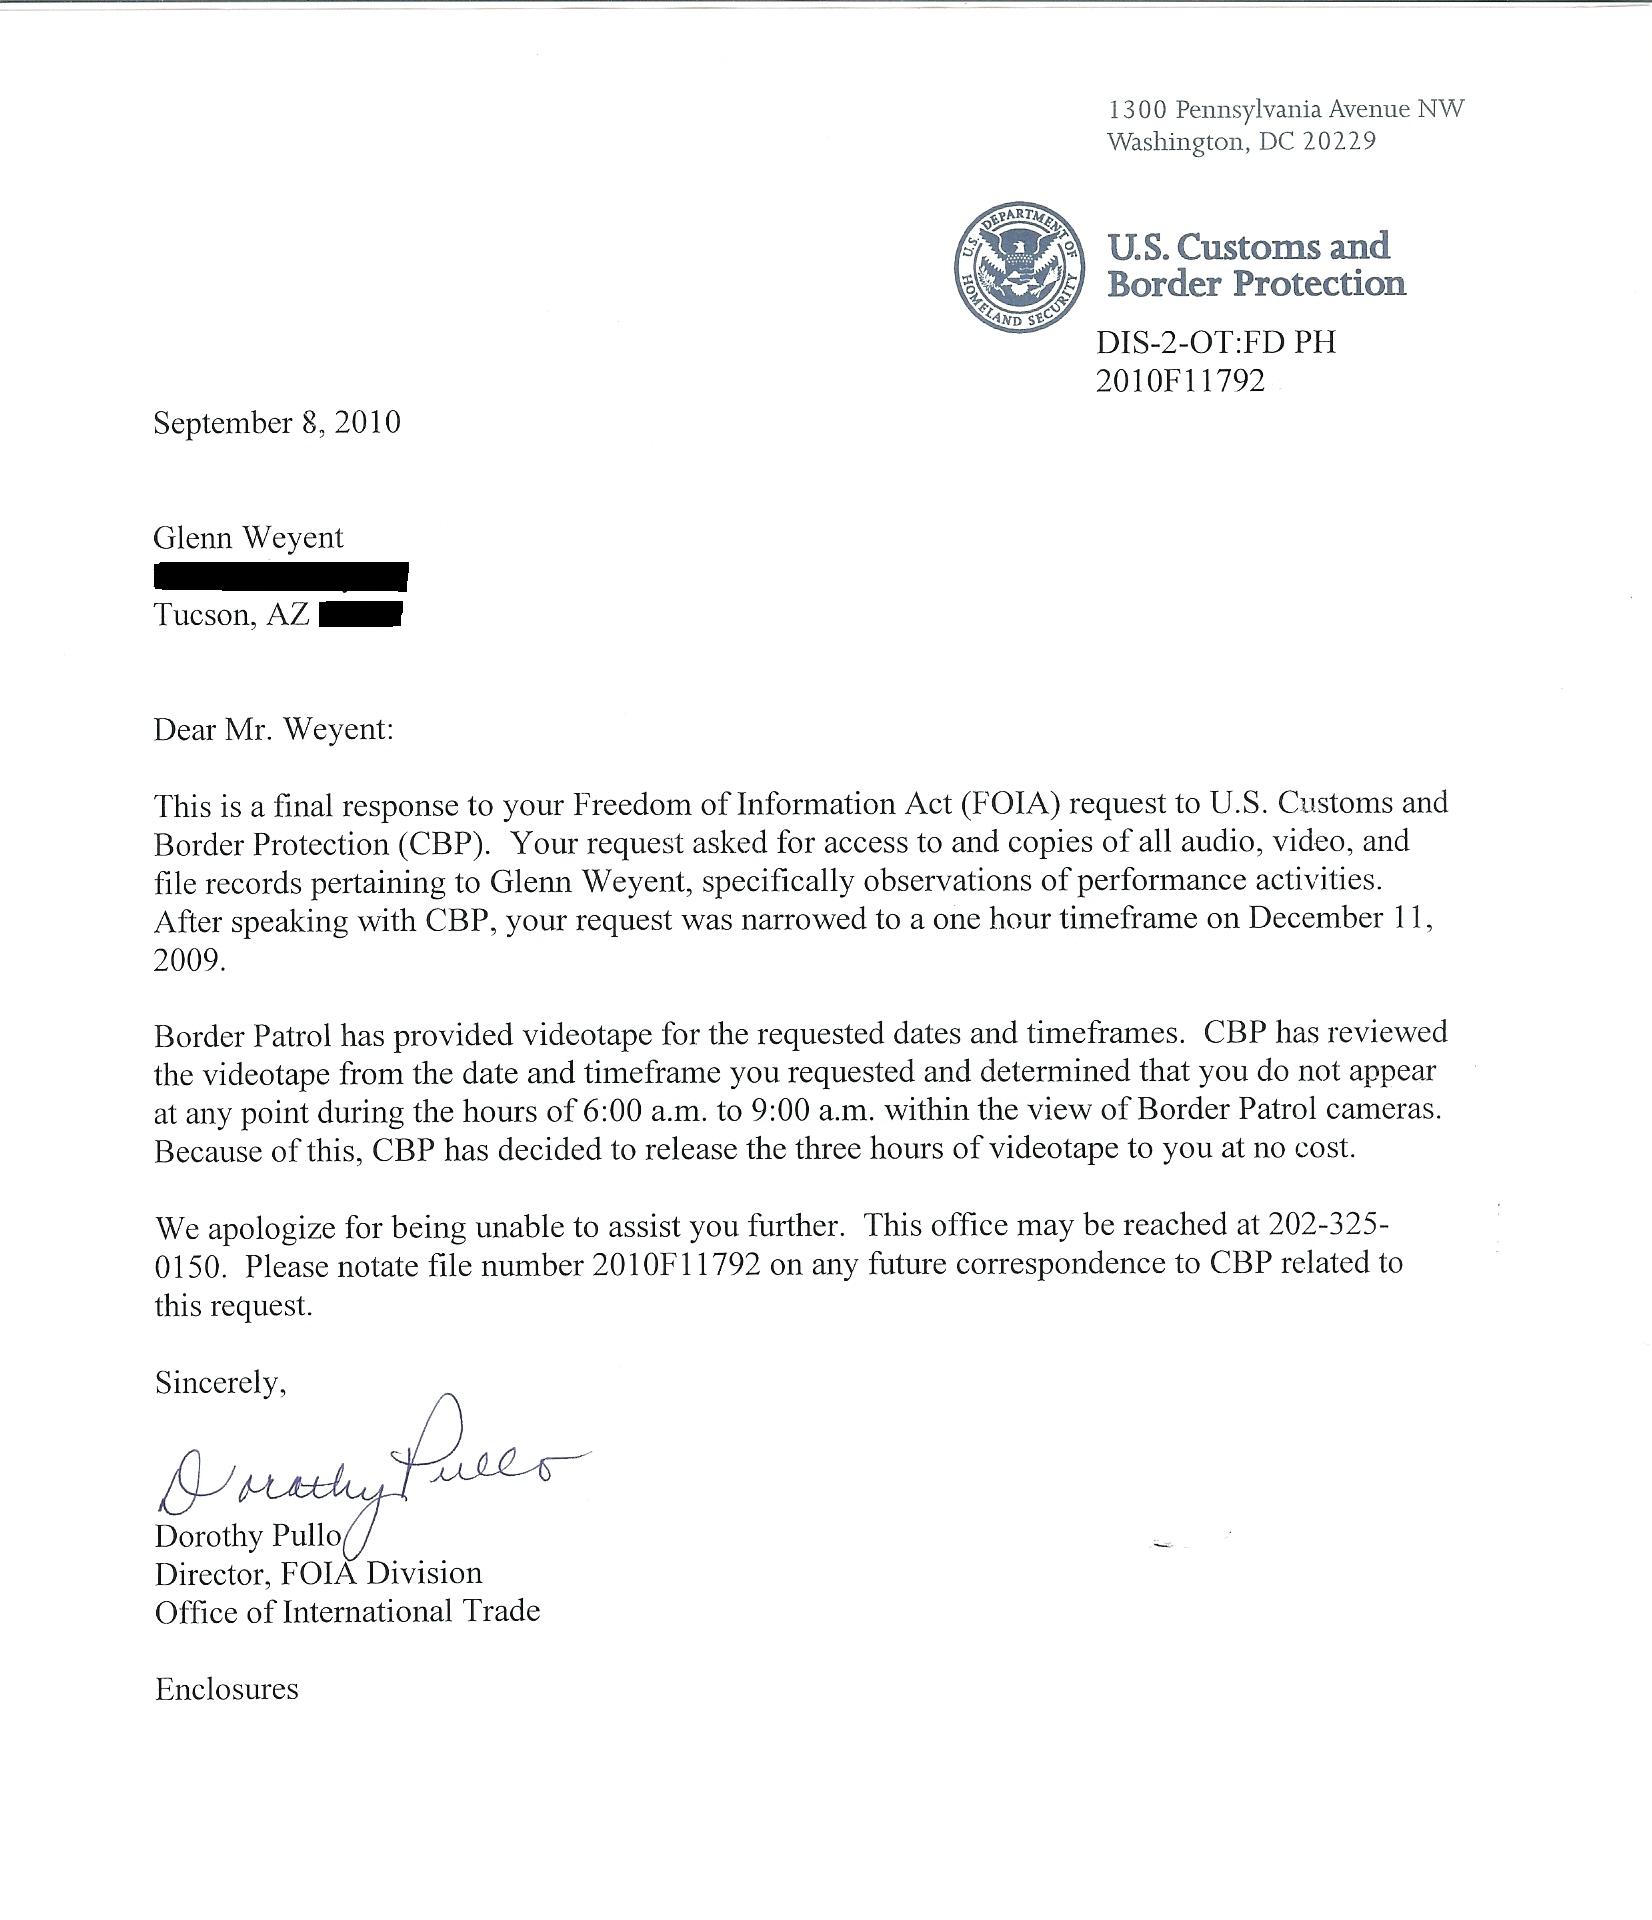 Letter Of Recommendation For Immigration | Crna Cover Letter